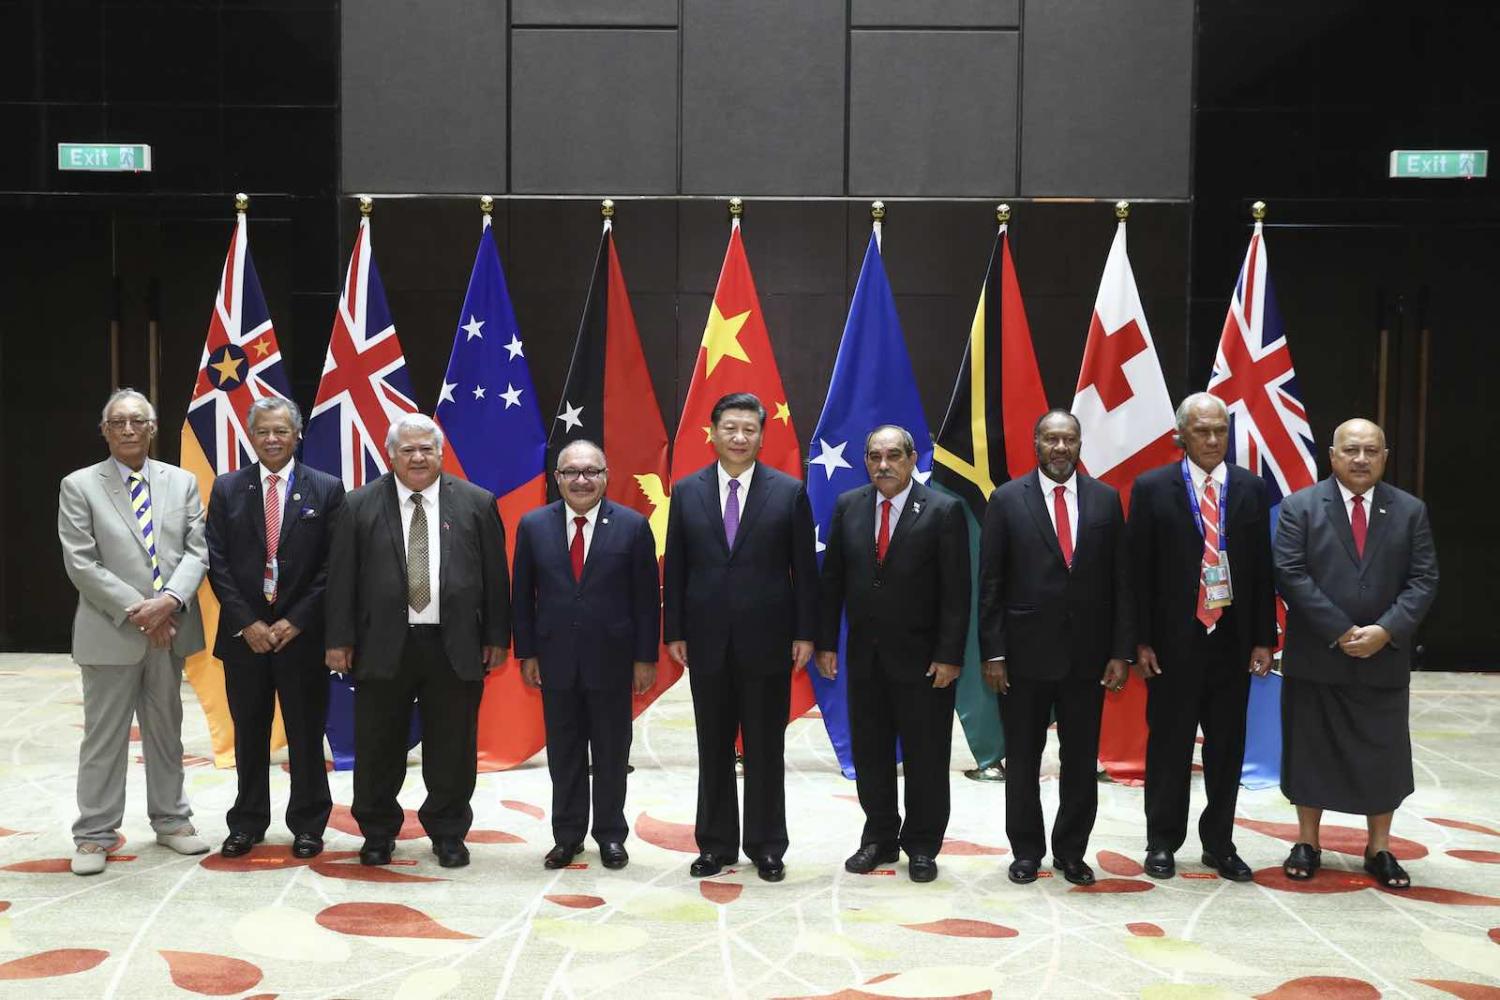 Chinese President Xi Jinping (centre) with Pacific Island leaders at the APEC Summit in Port Moresby, Papua New Guinea, November 2018. (Photo: Sheng Jiapeng/China News Service via Getty Images)